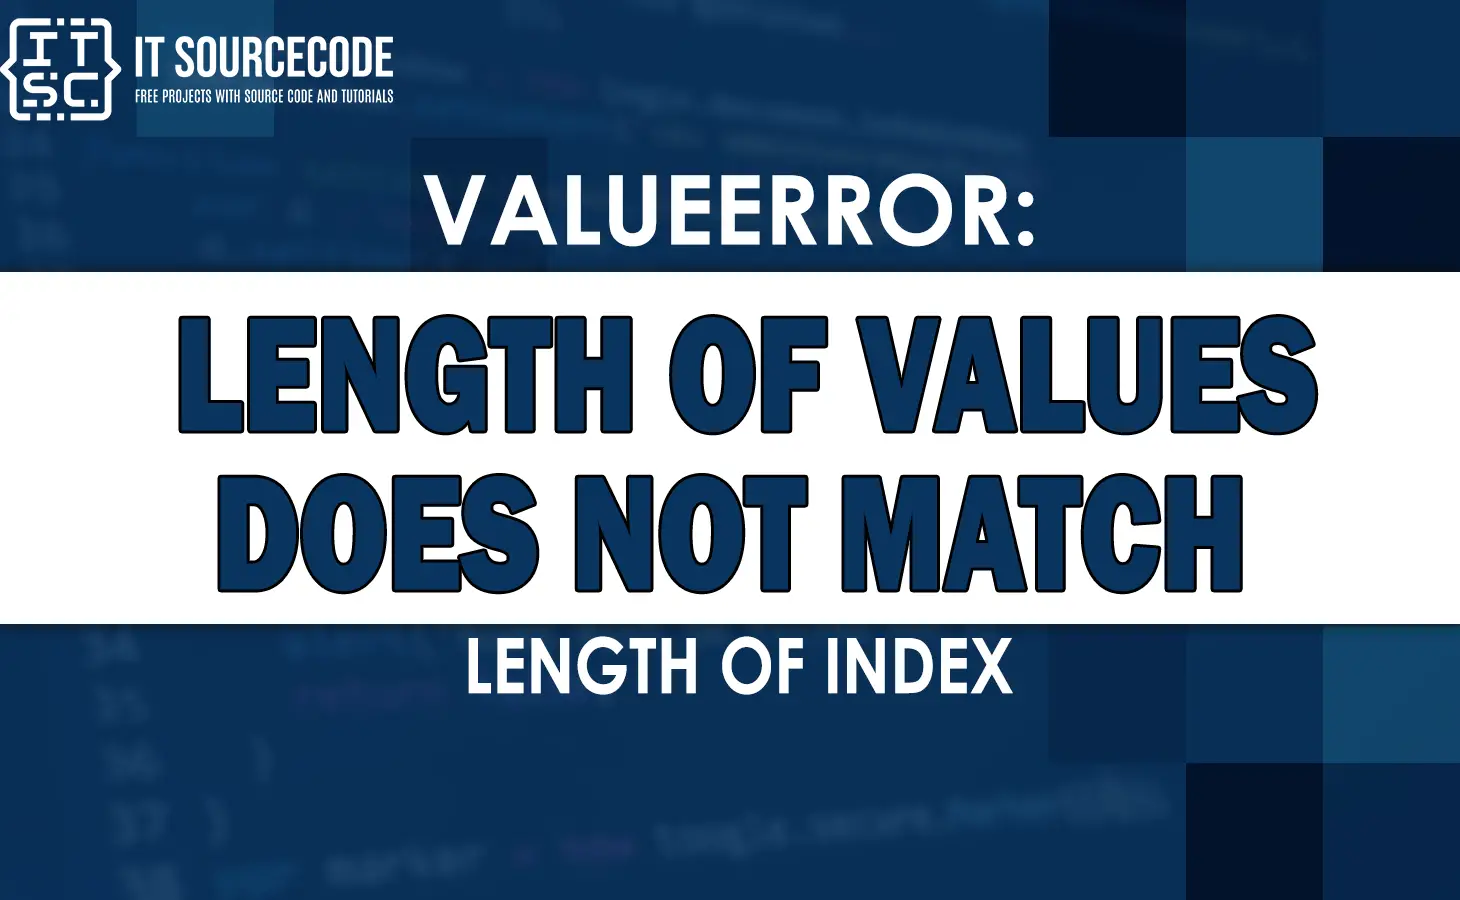 valueerror length of values does not match length of index